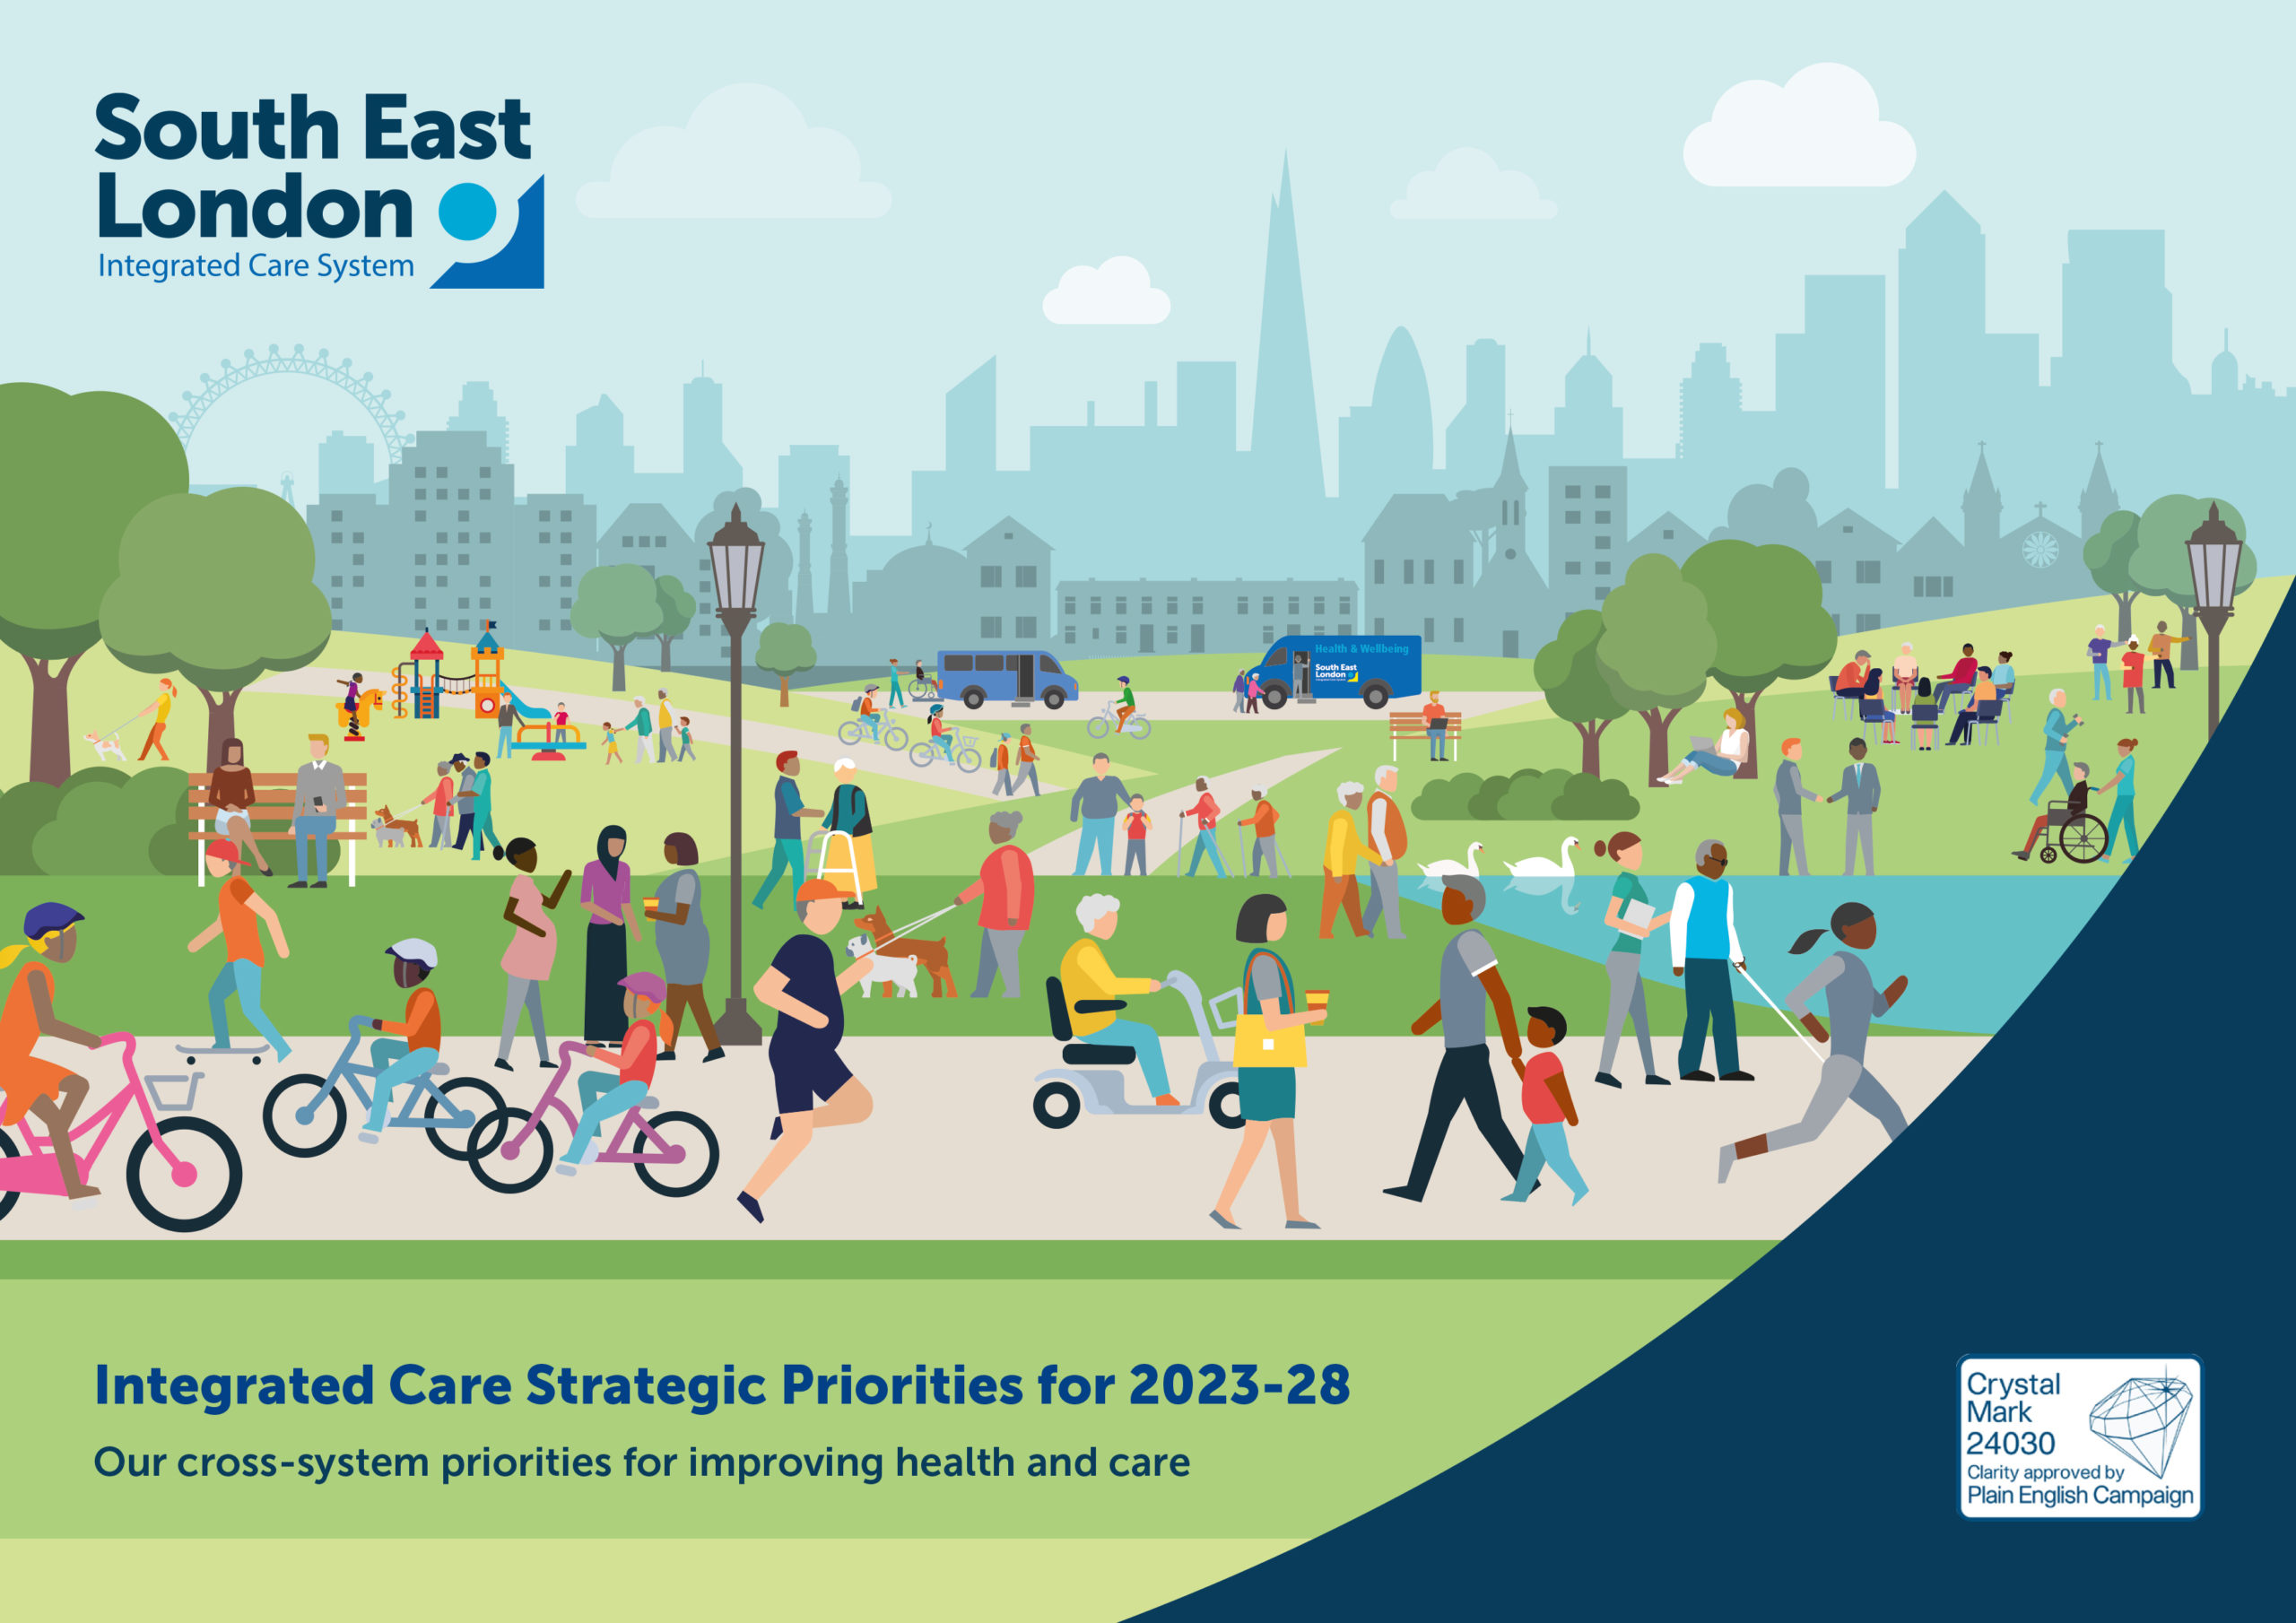 Cover of the SEL ICS strategic priorities, with an illustration of a park, with people walking around, and the skyline of London in the background